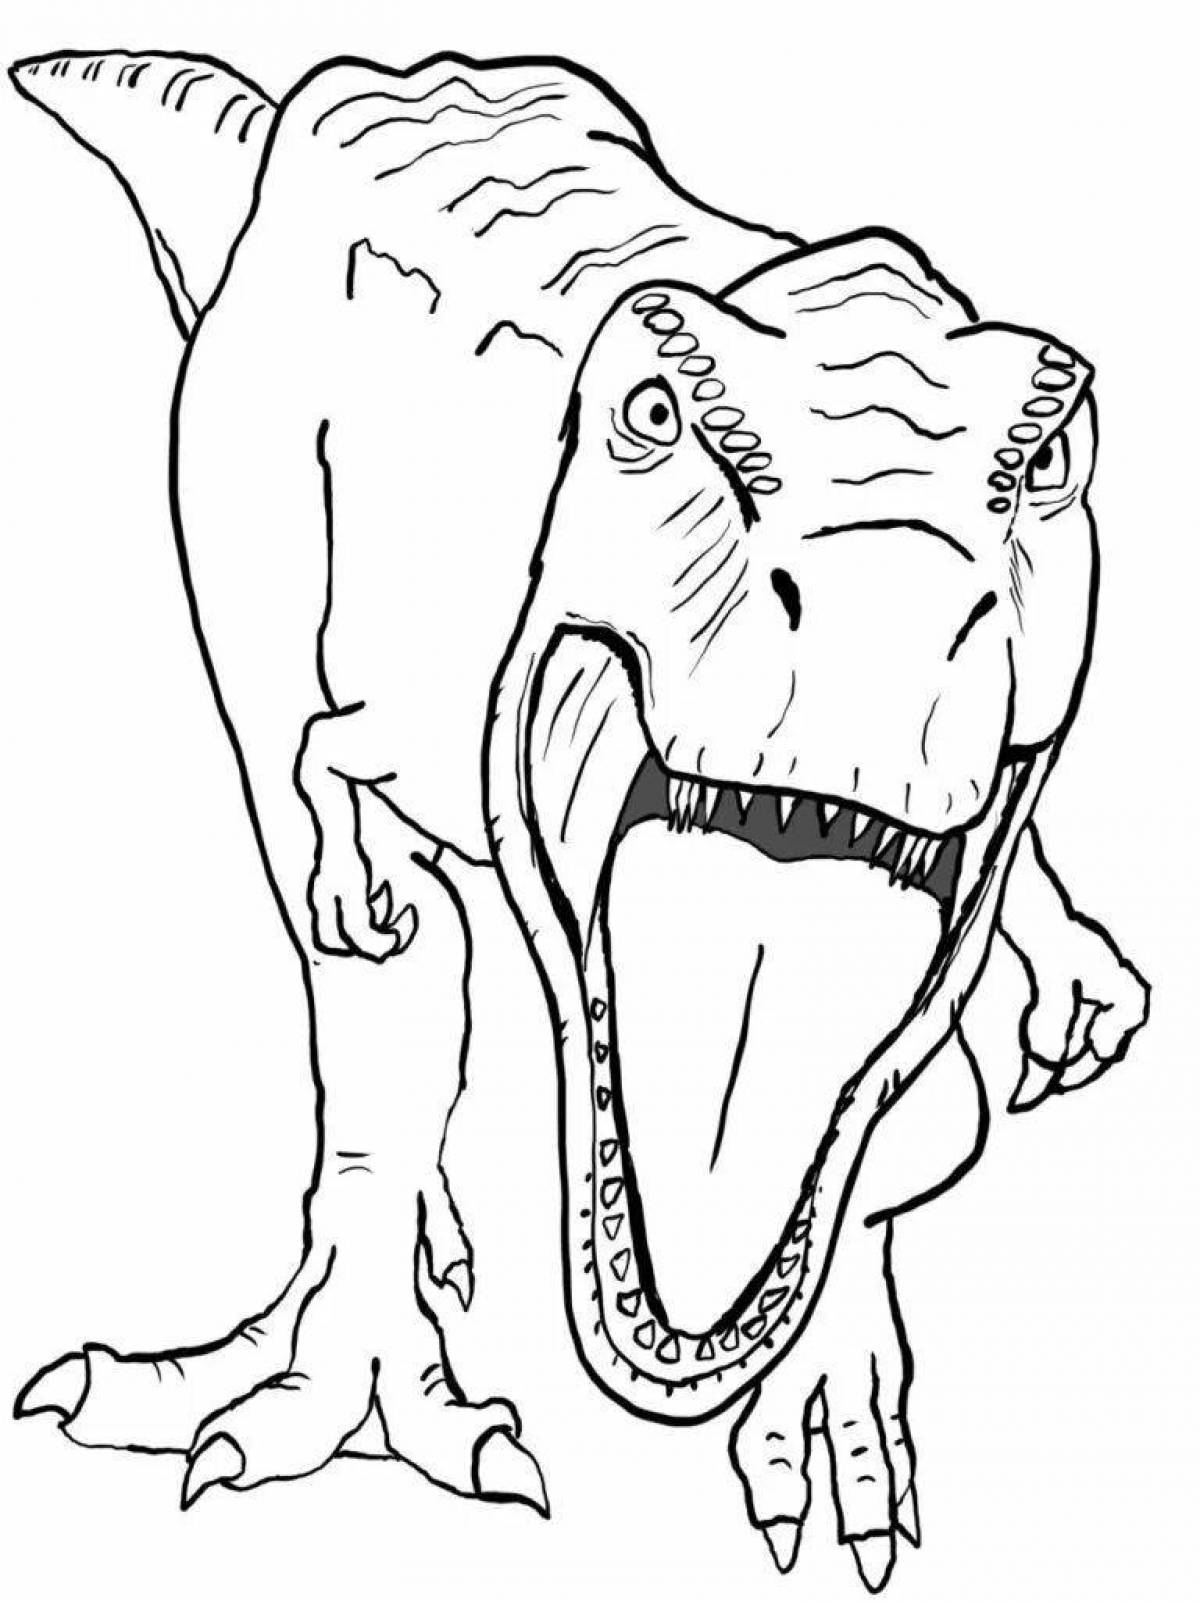 Animated t-rex coloring page